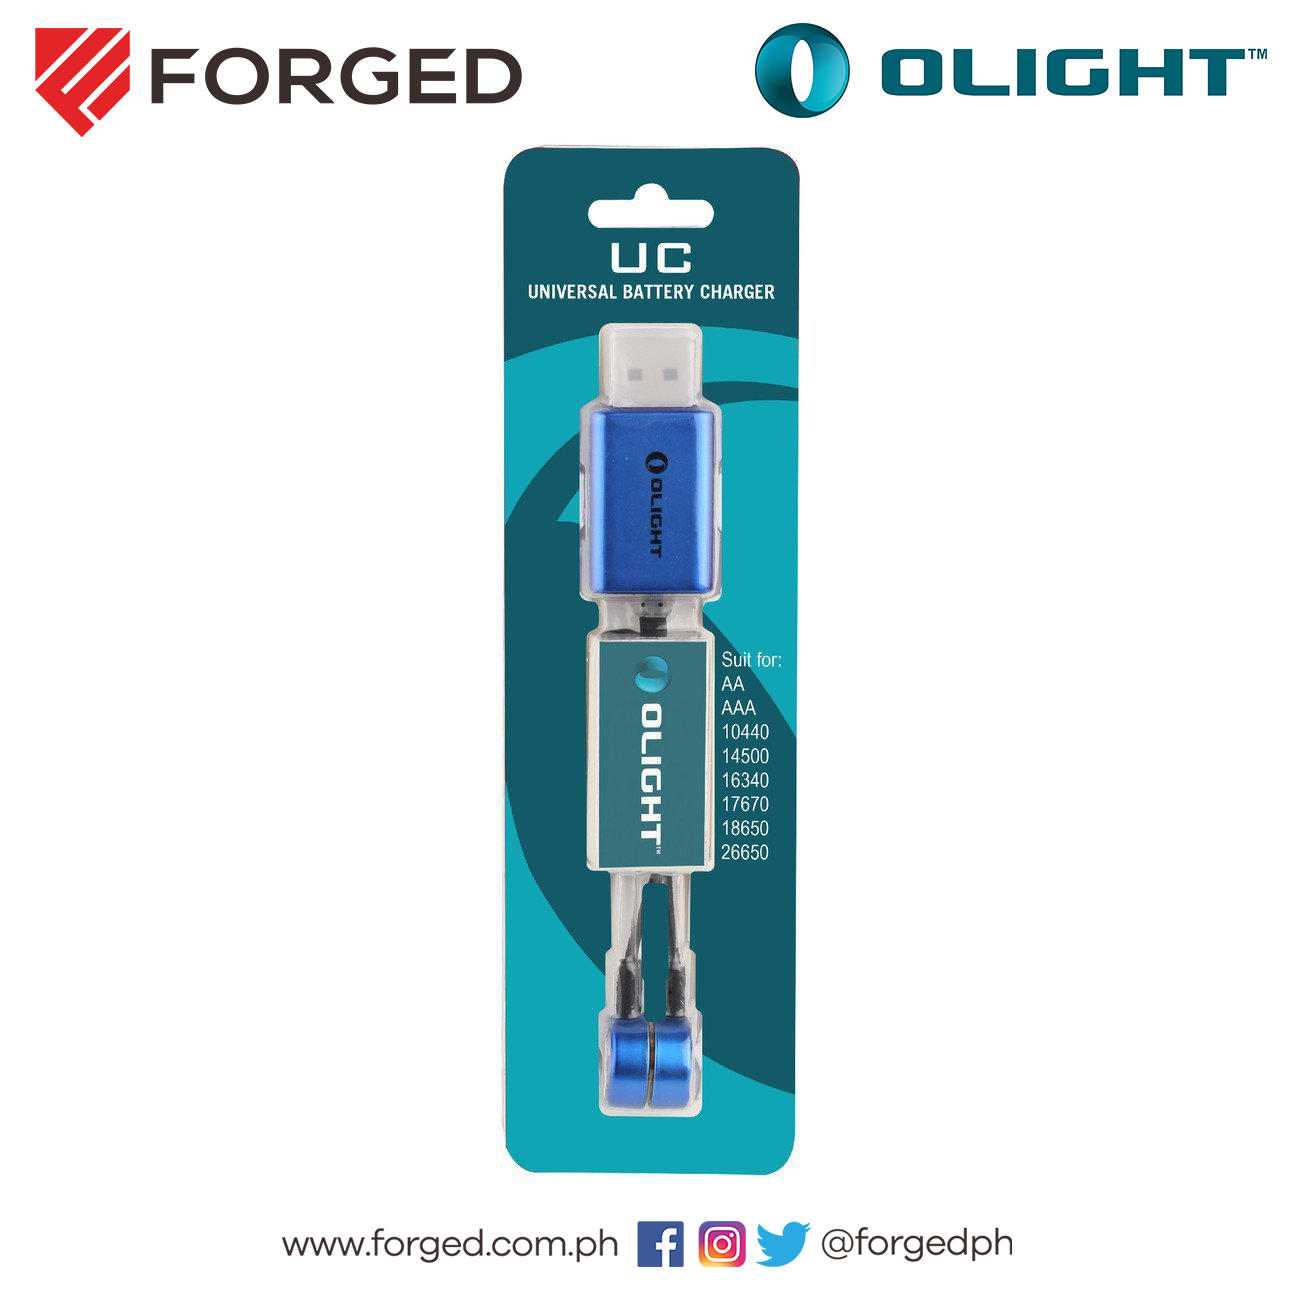 Olight UC Magnetic USB Charger for 18650/16340/14500/AA/AAA & More